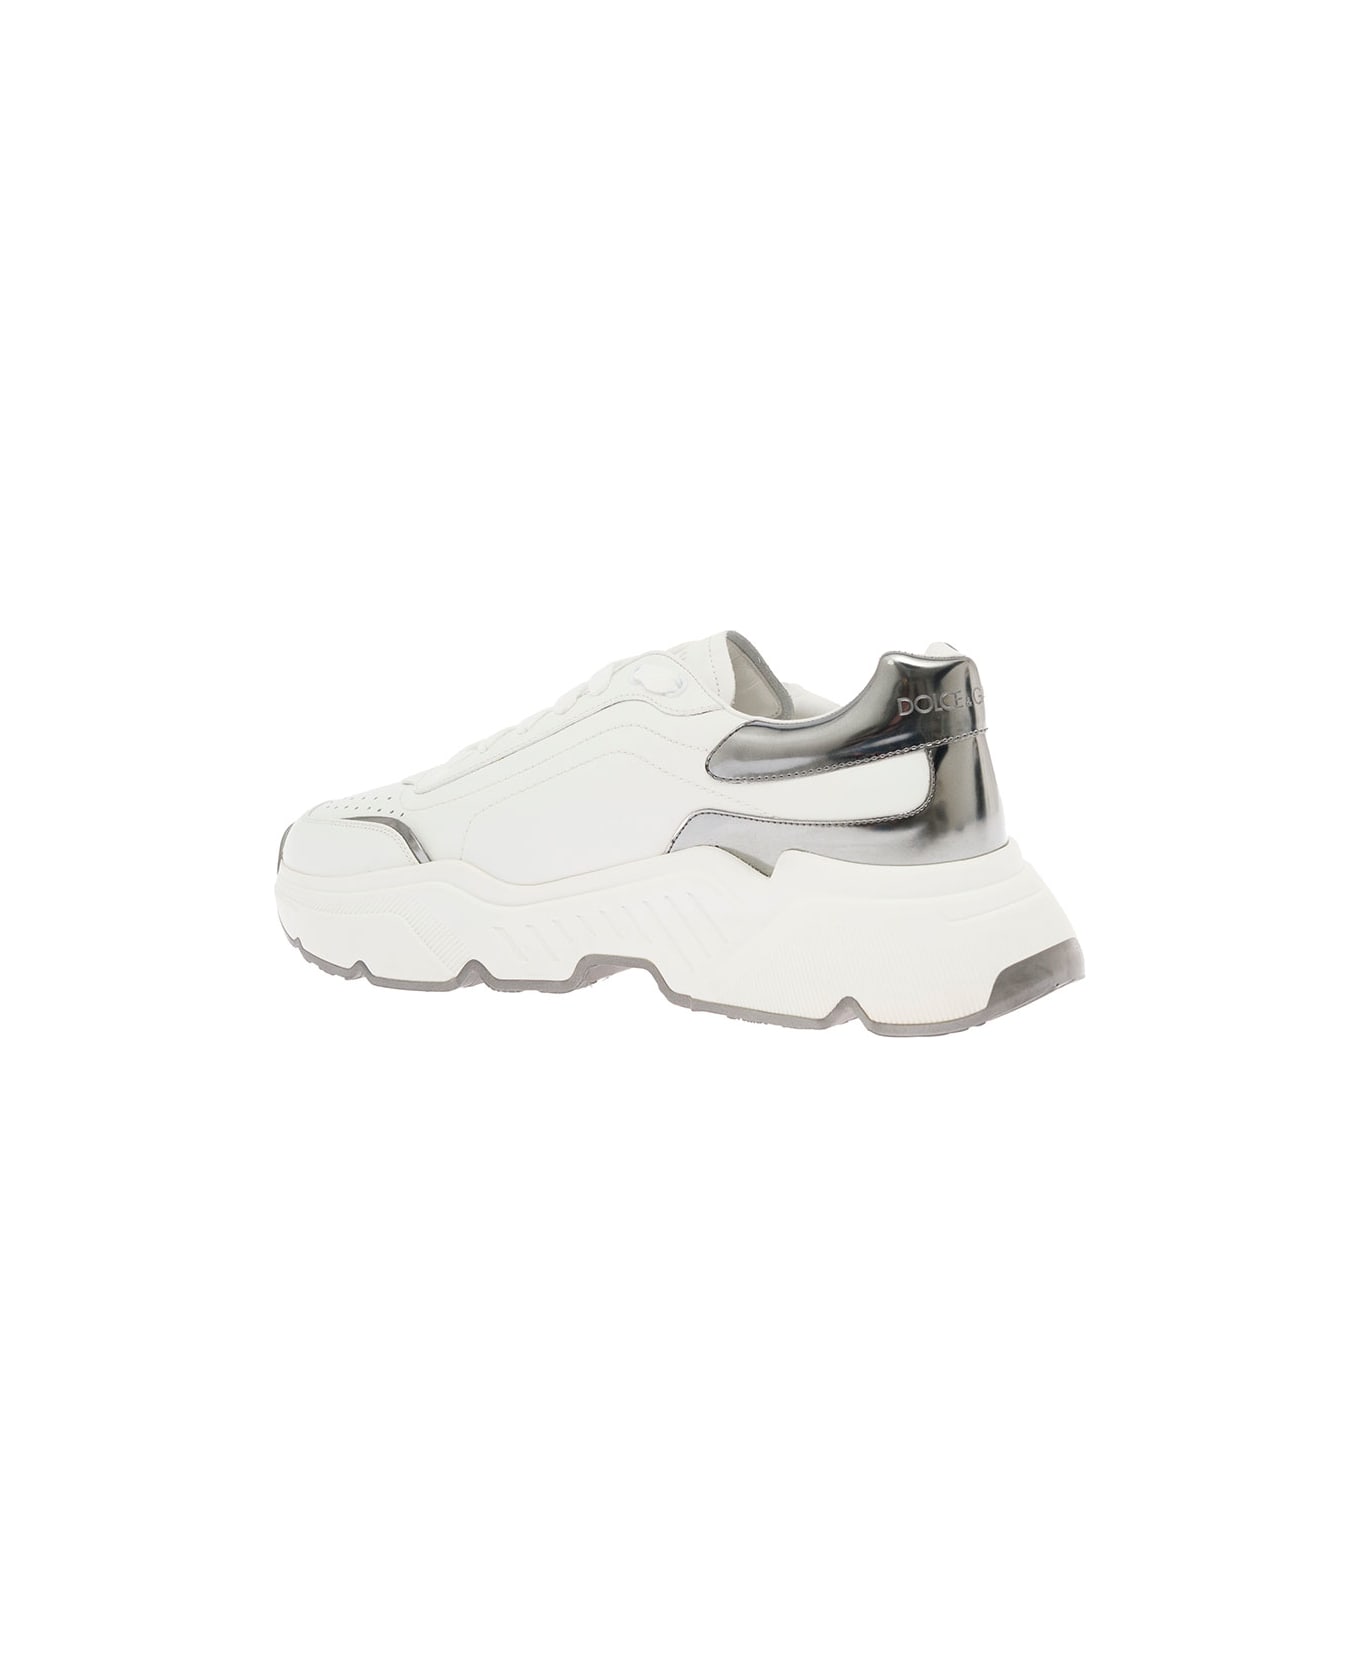 Dolce & Gabbana Man's Daymaster  White And Silver Leather  Sneakers - White